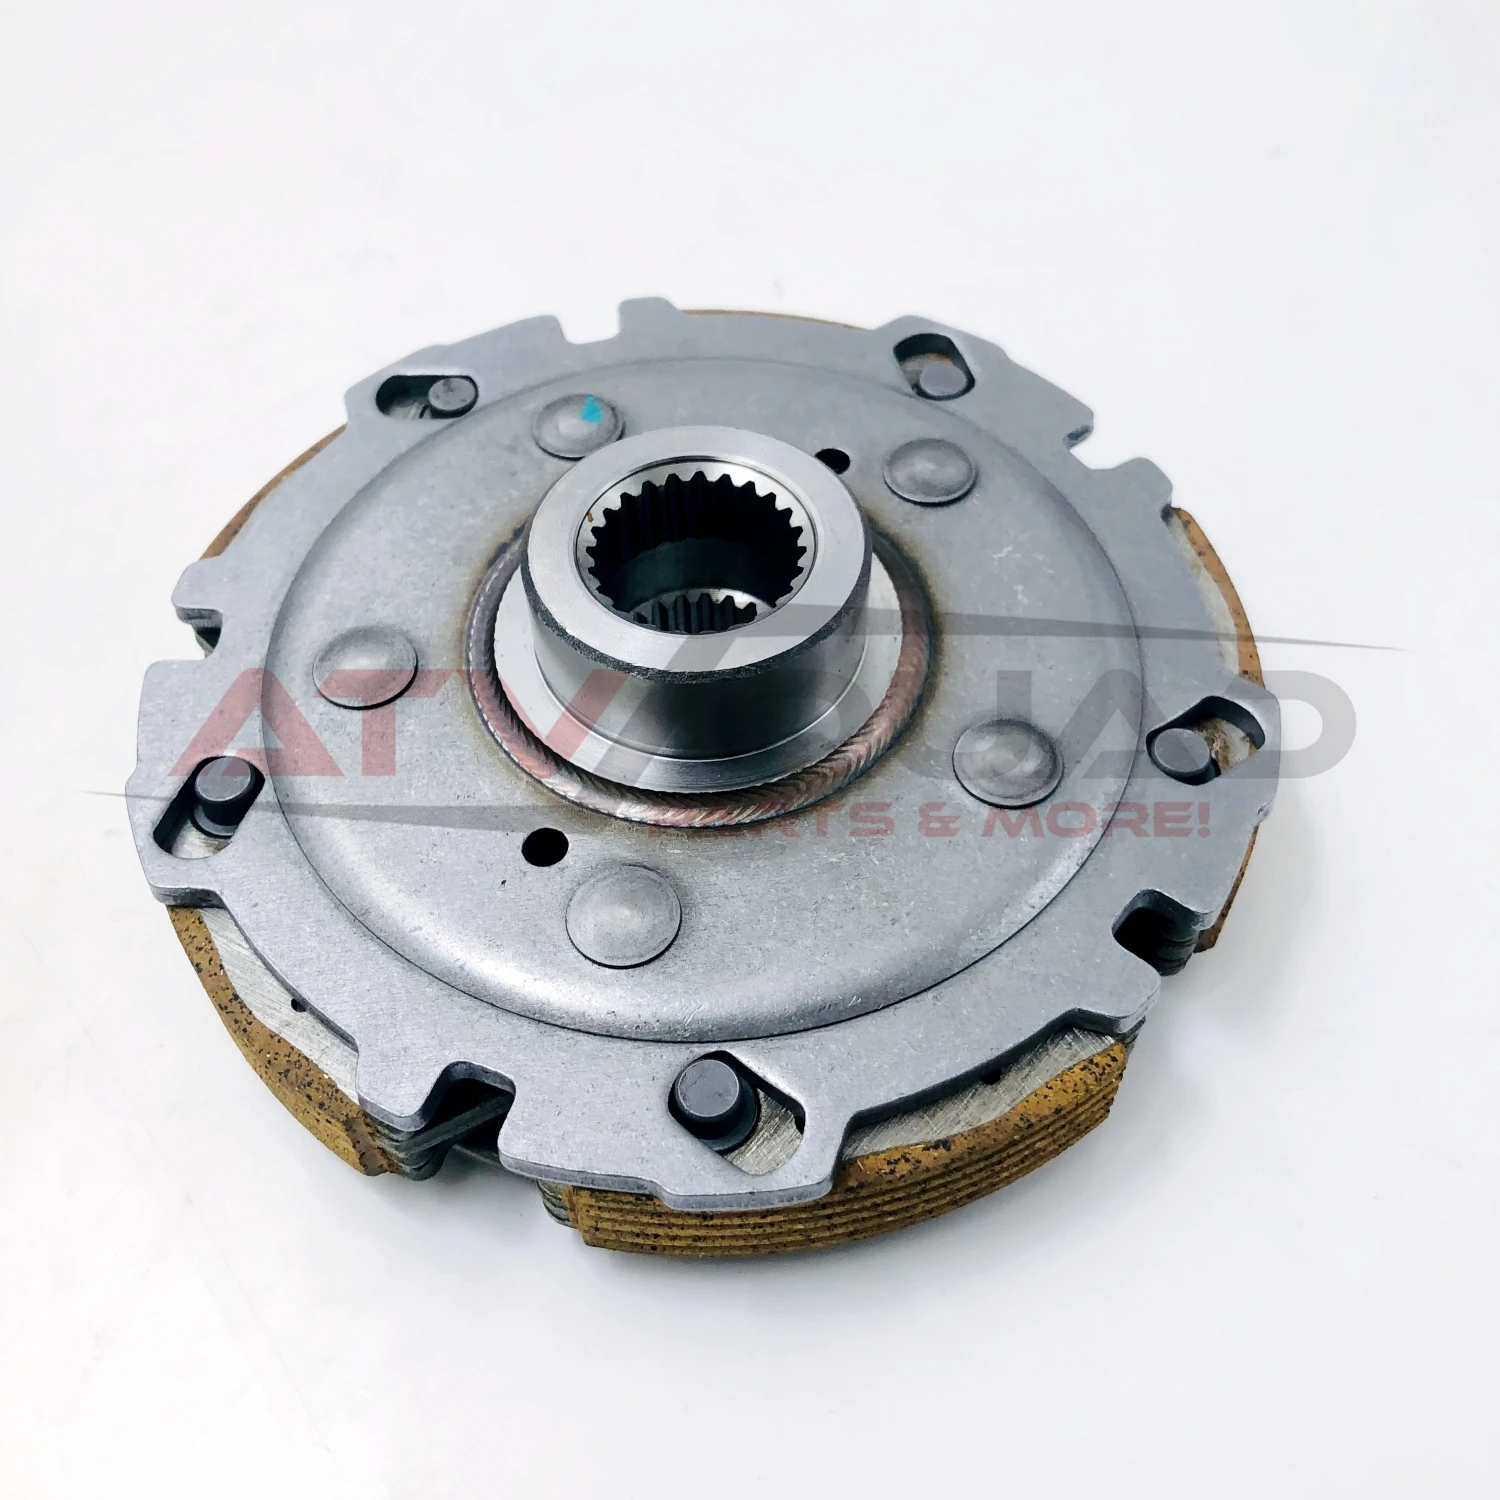 Wet Clutch Assy for Stels 400H 450H Hisun Forge 400 Tactic 400 HS400 21230-F12-0000 LU020593 21230-003-0000